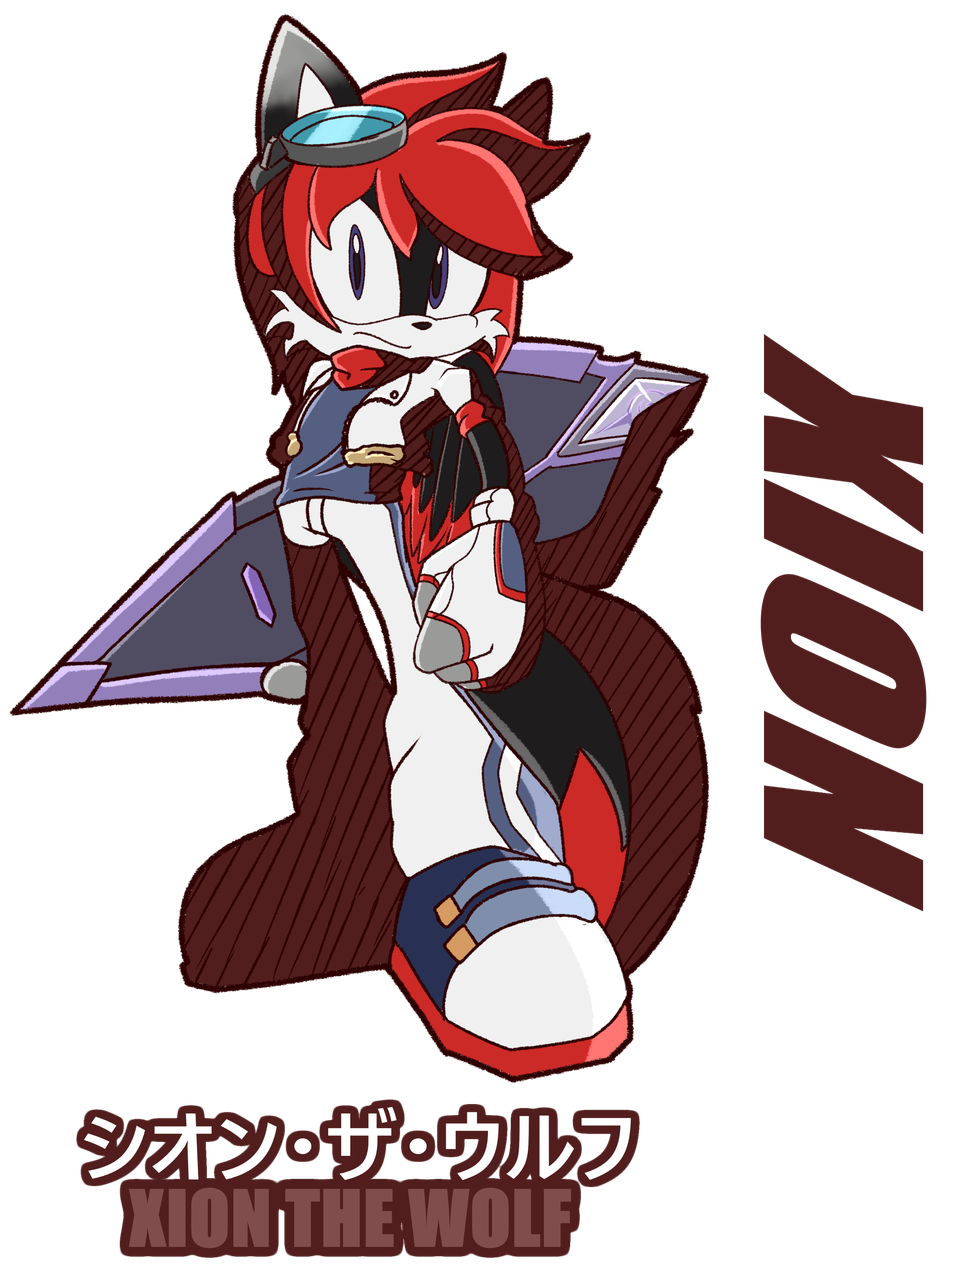 Sonic Riders - Xion